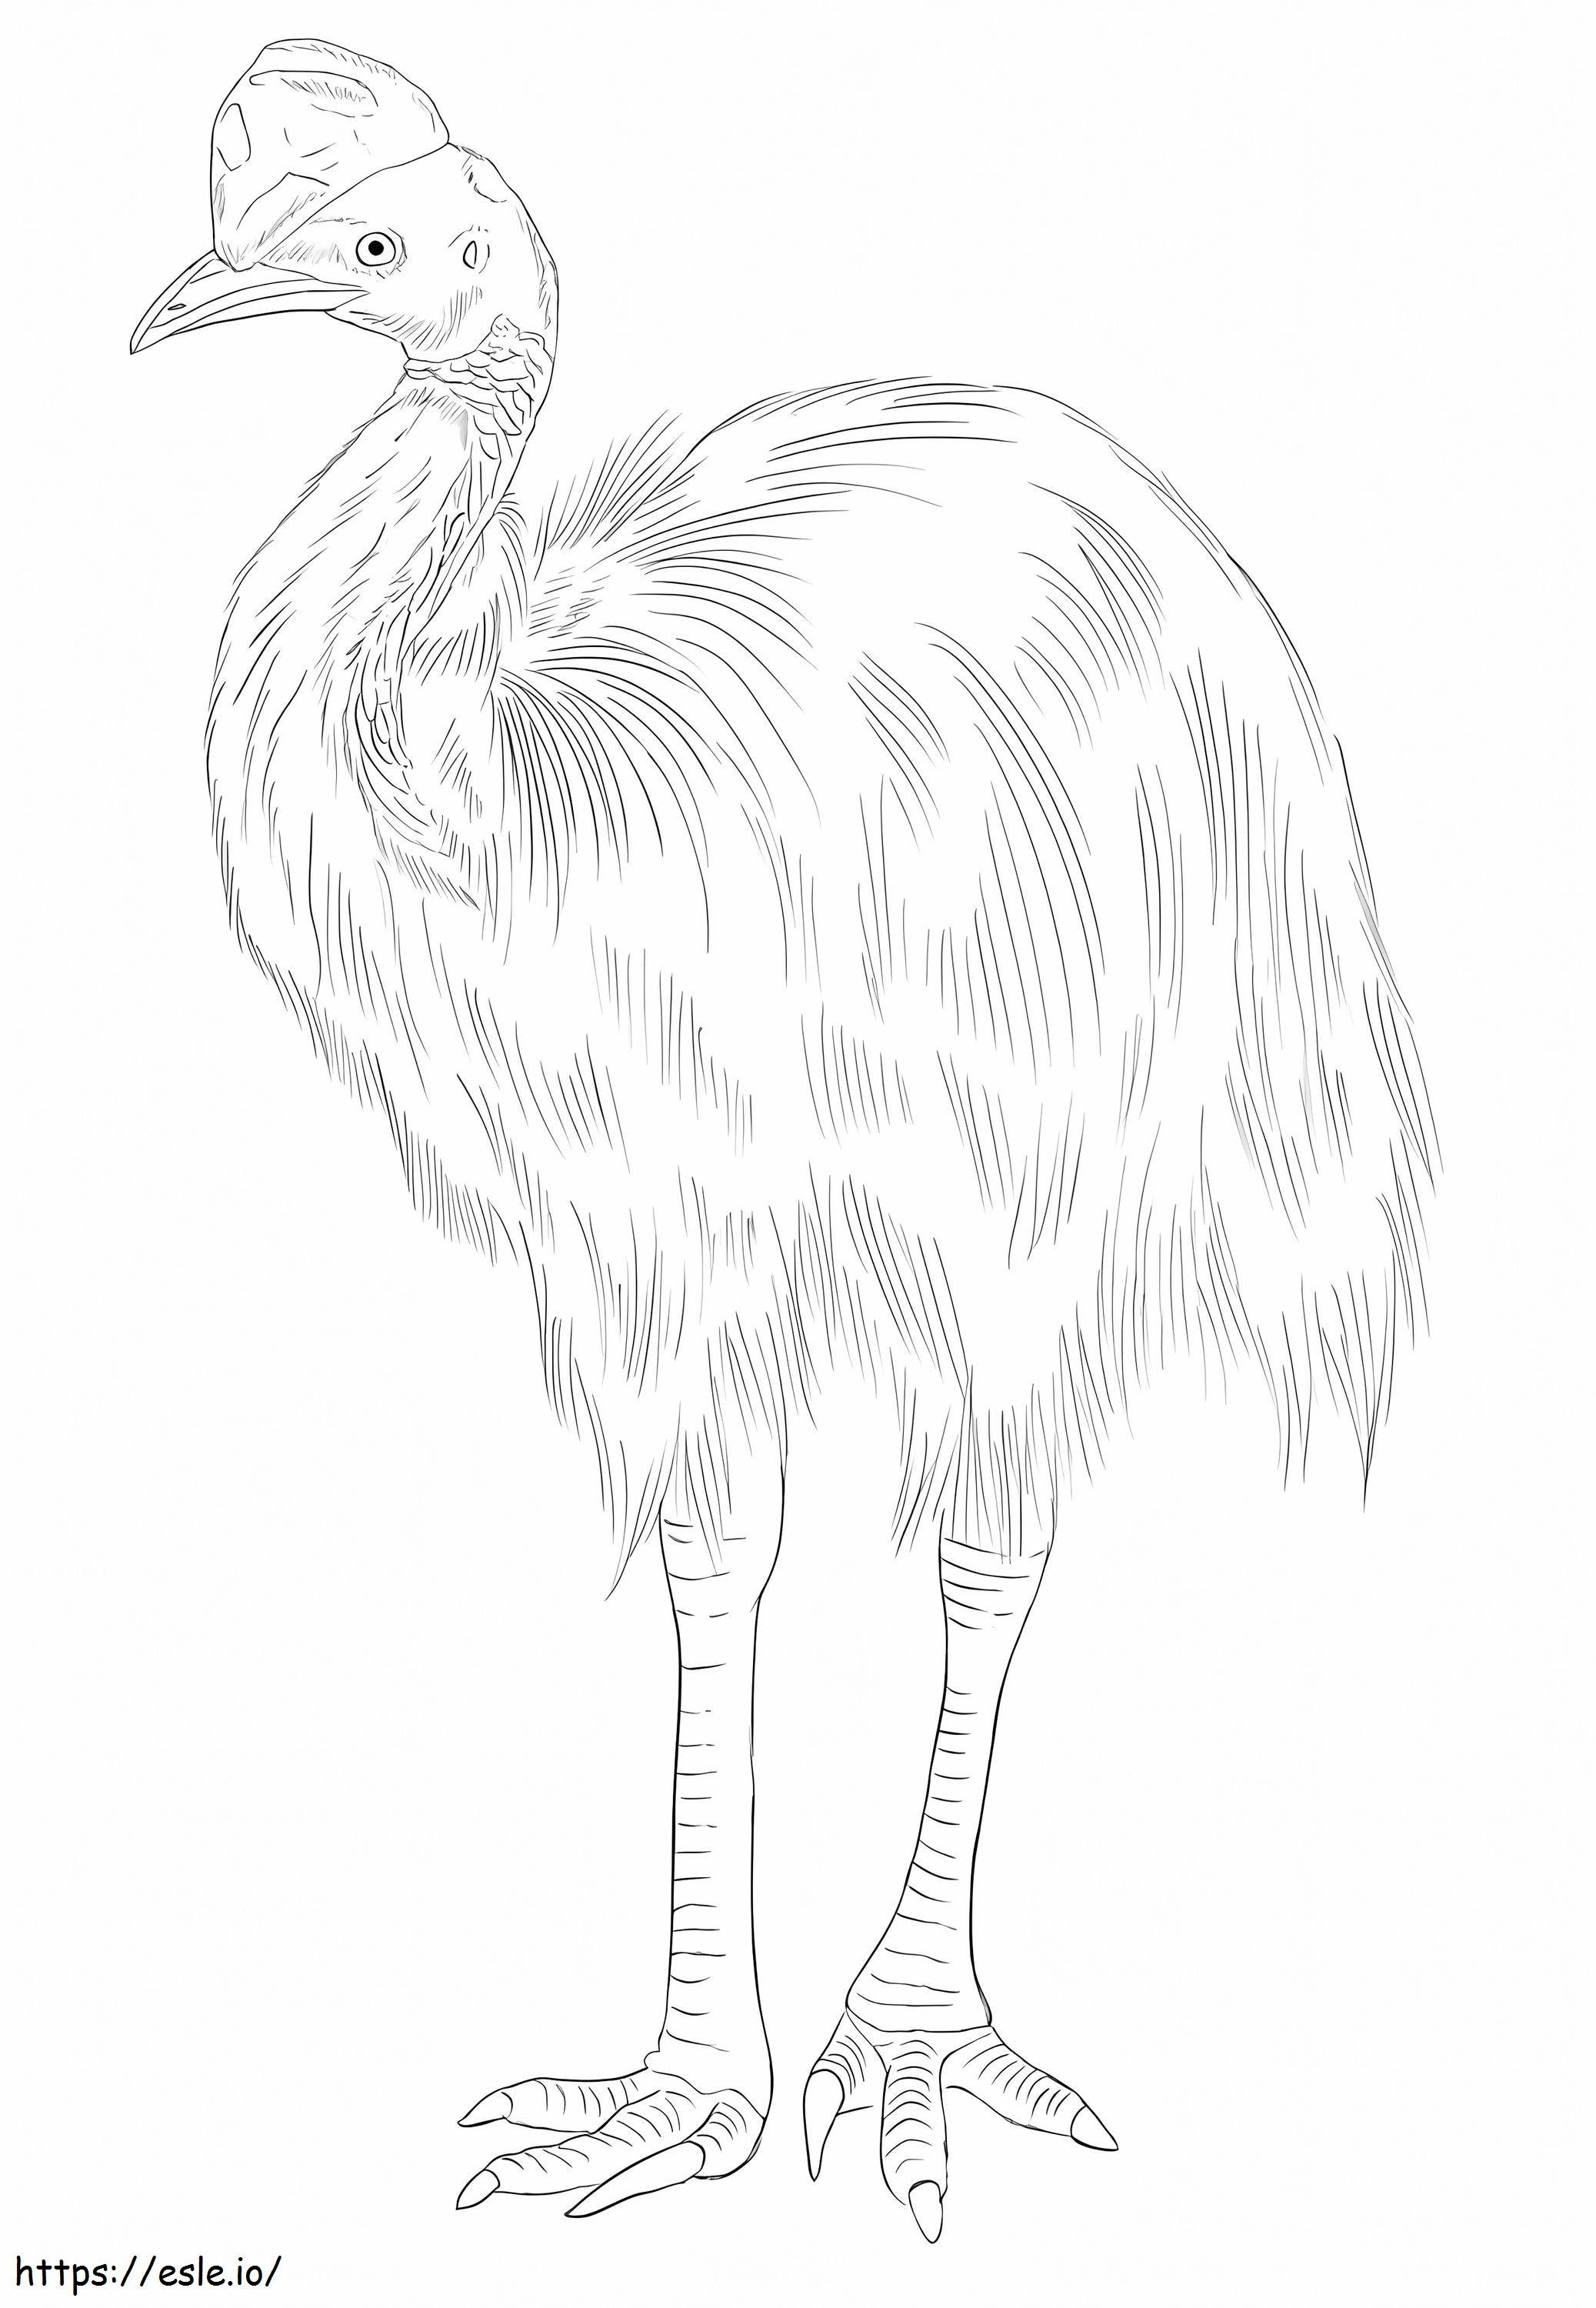 Northern Cassowary coloring page